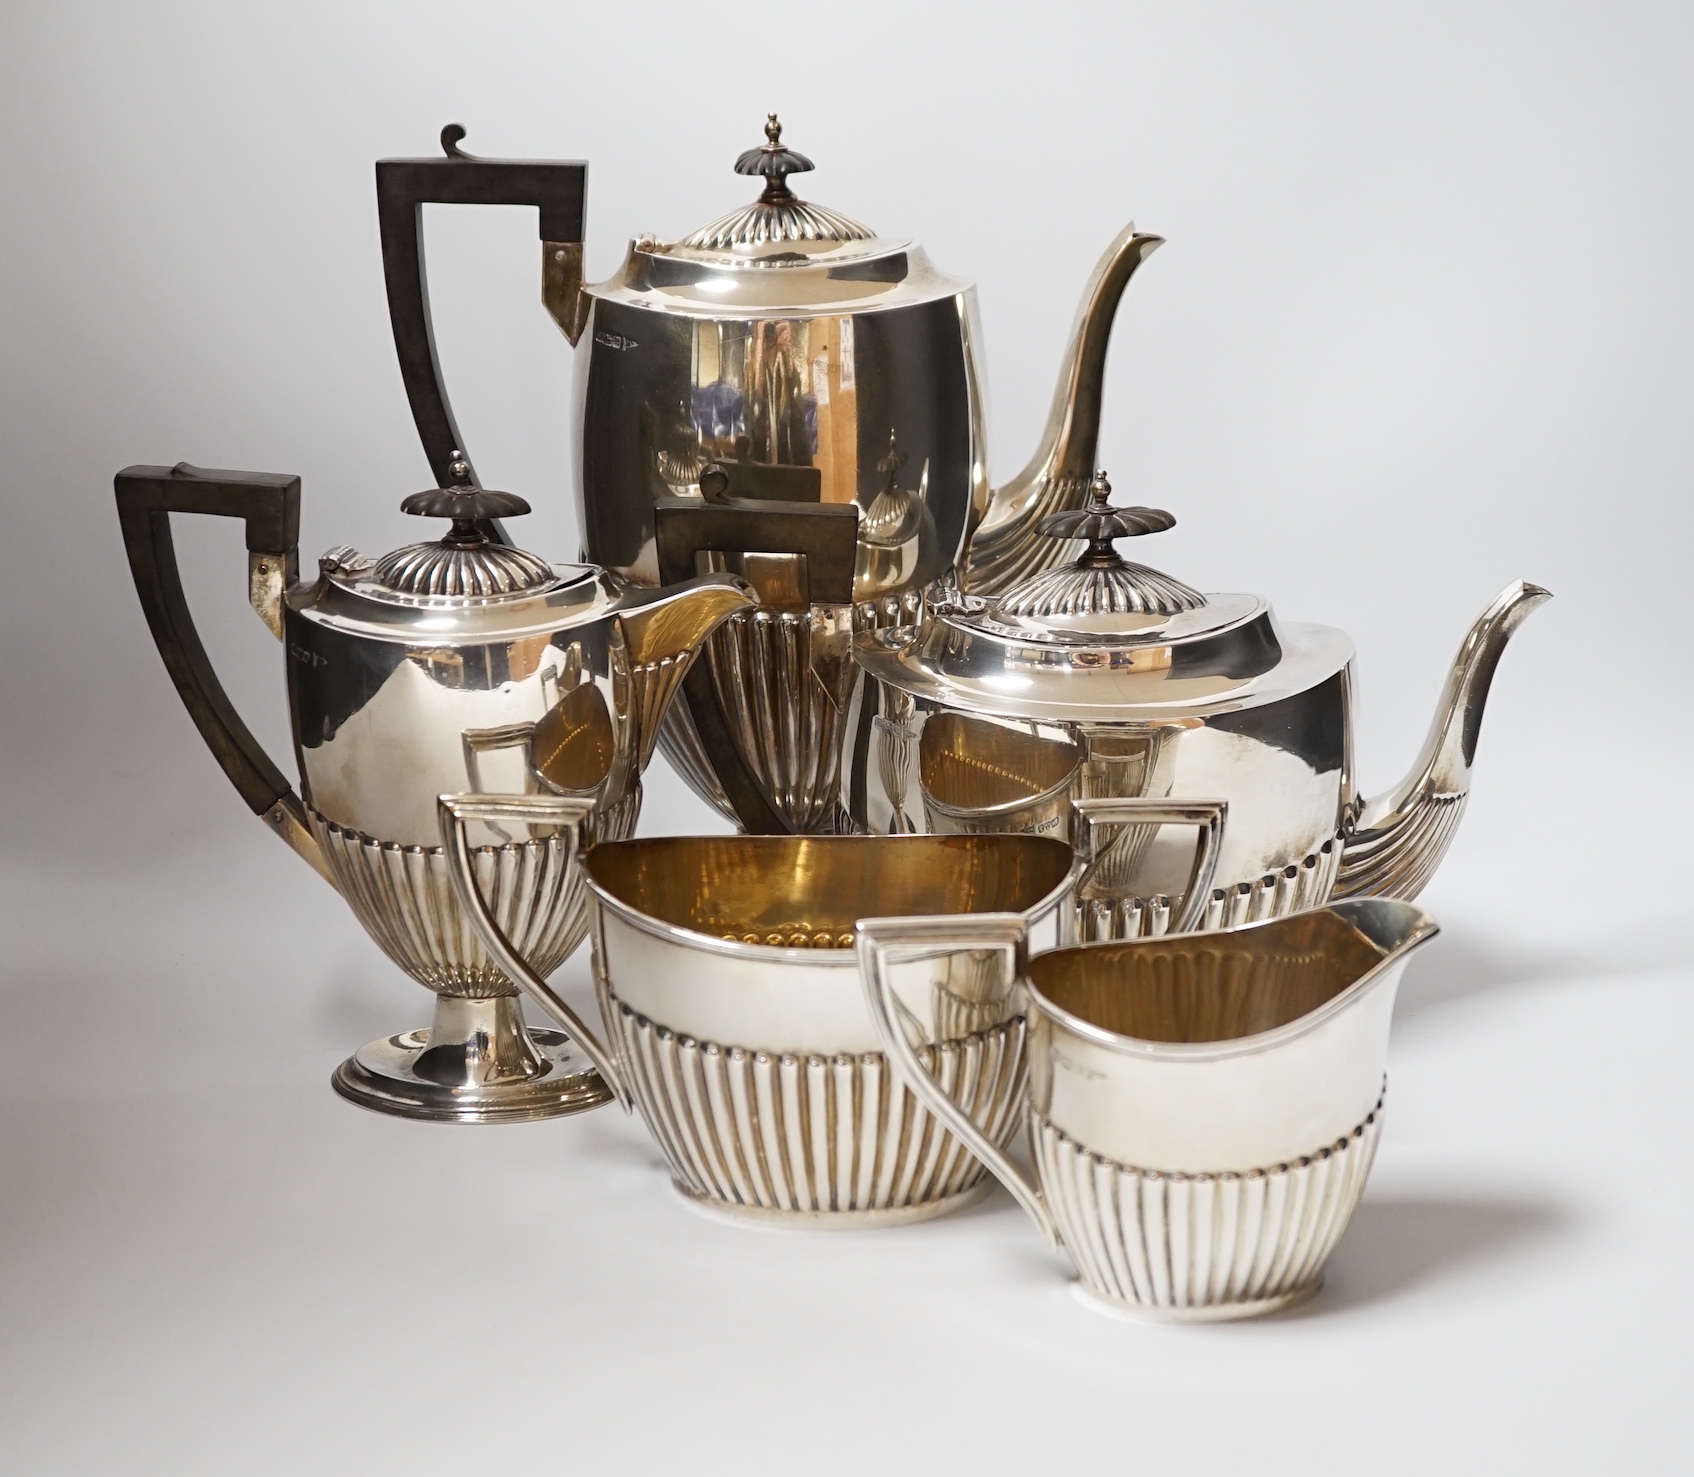 An Edwardian matched demi fluted silver five piece tea and coffee service, by Walker & Hall, Chester, 1906 and Sheffield, 1907/1908, the coffee pot and hot water jug with pedestal foot, gross weight 79.3oz.